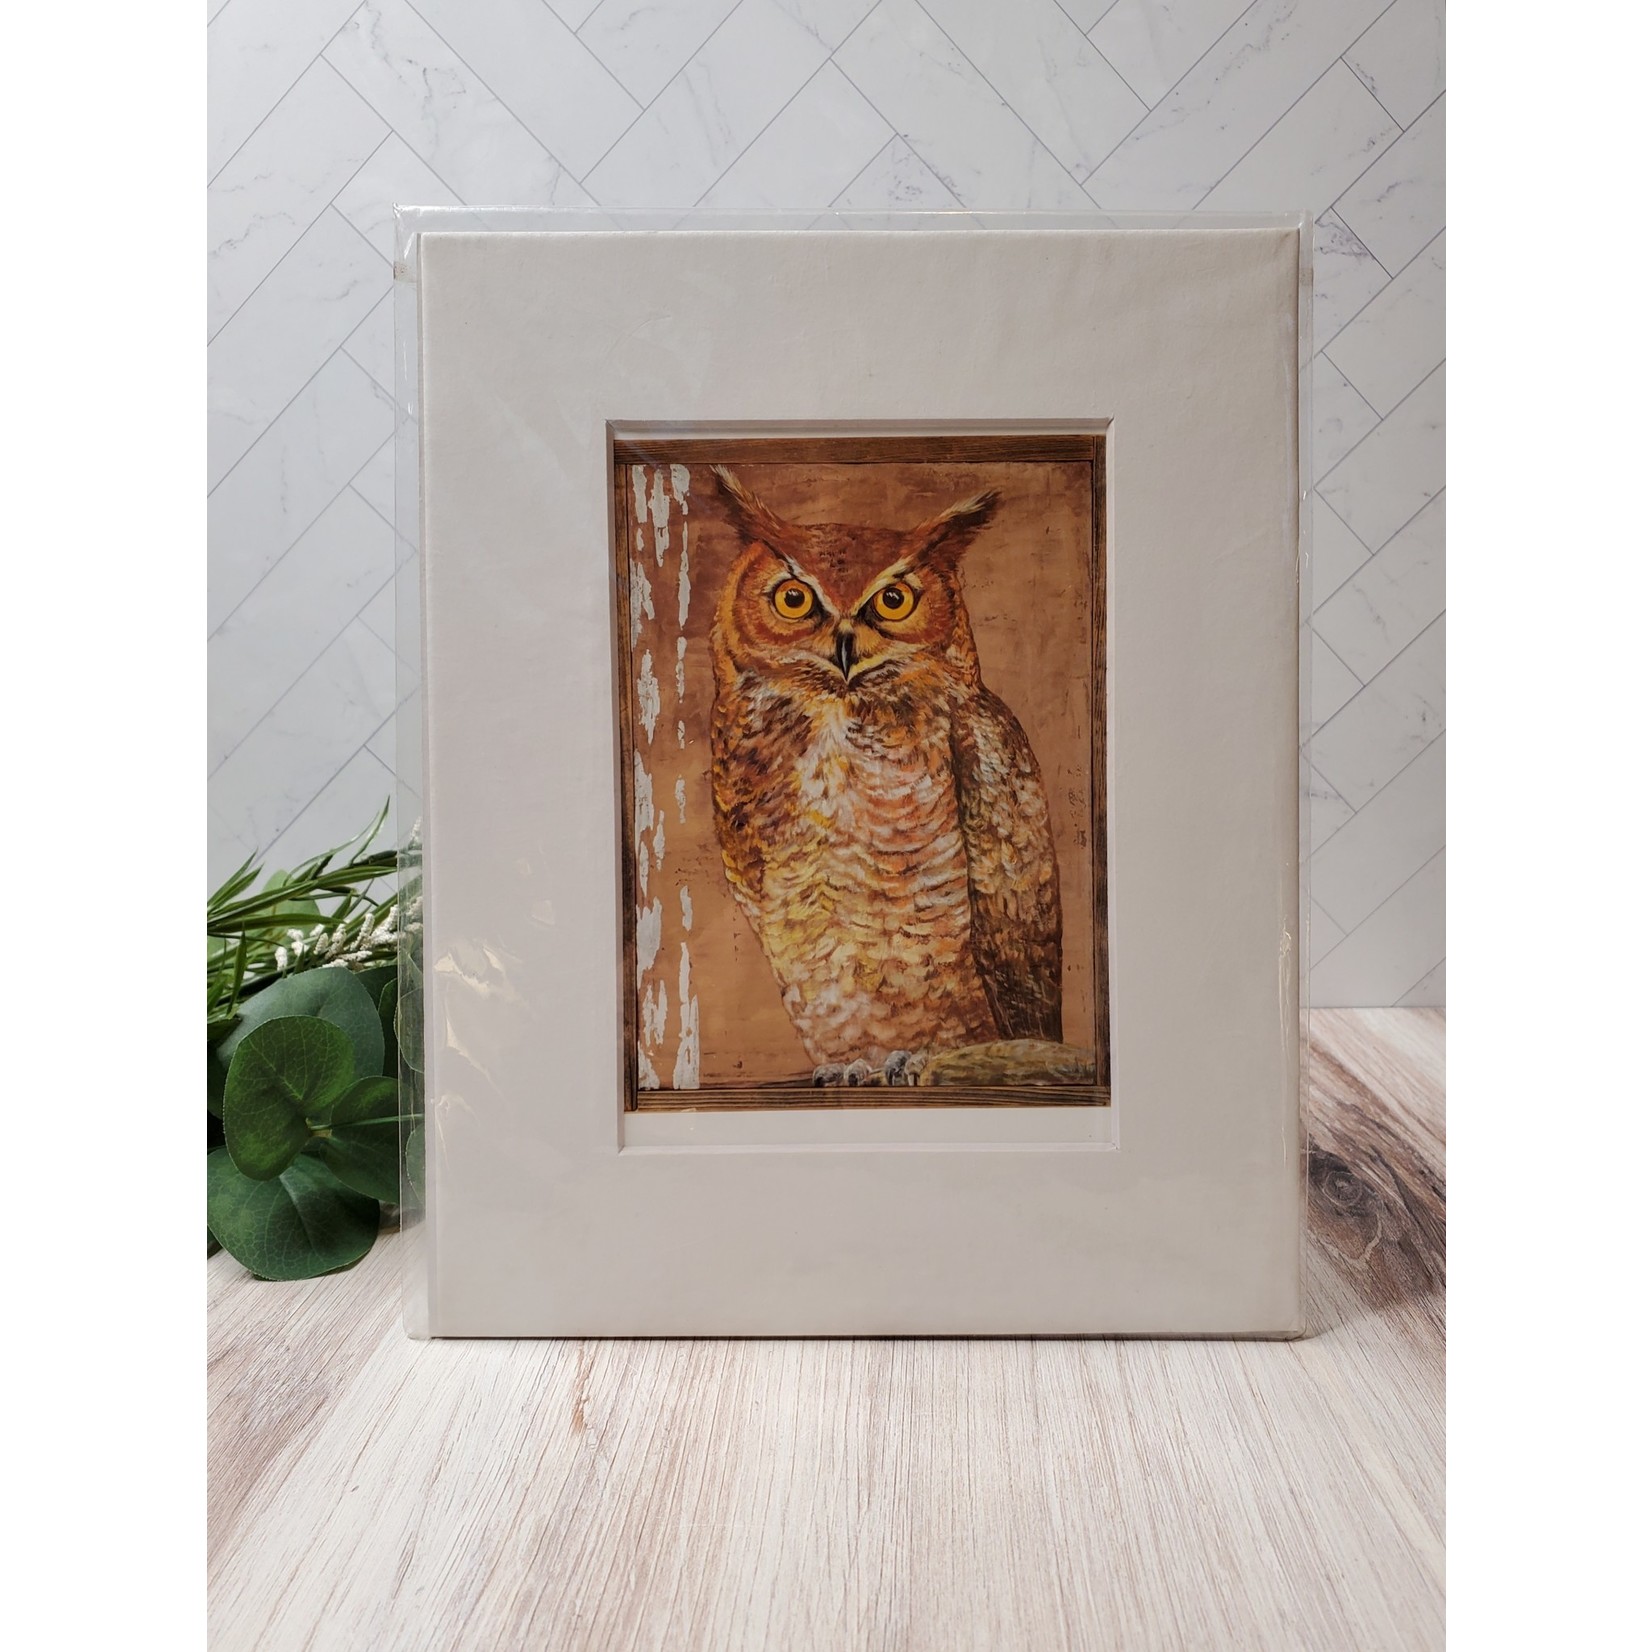 Sara L Smith "Great Horned Owl" - archival giclee print -matted - 8x10"